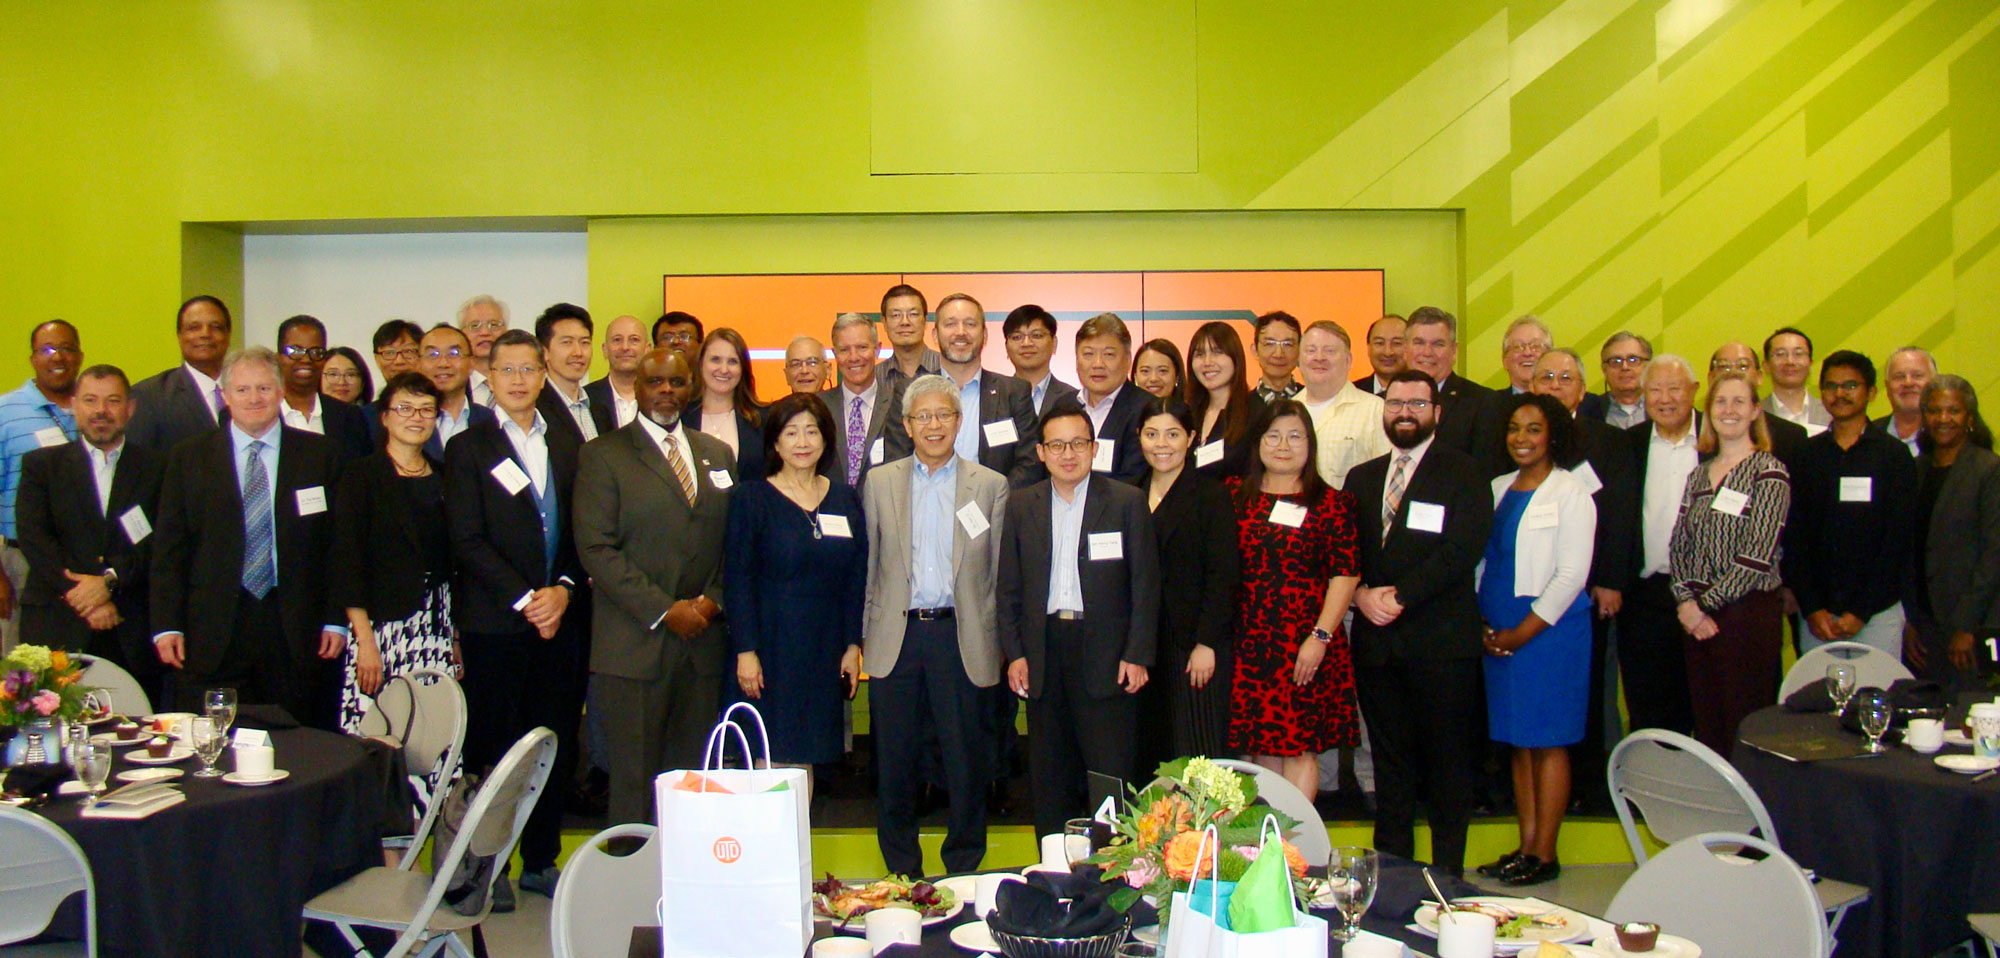 The Taiwan Semiconductor Delegation joins representatives from UT Dallas, local government, and North Texas industry for a group photo.